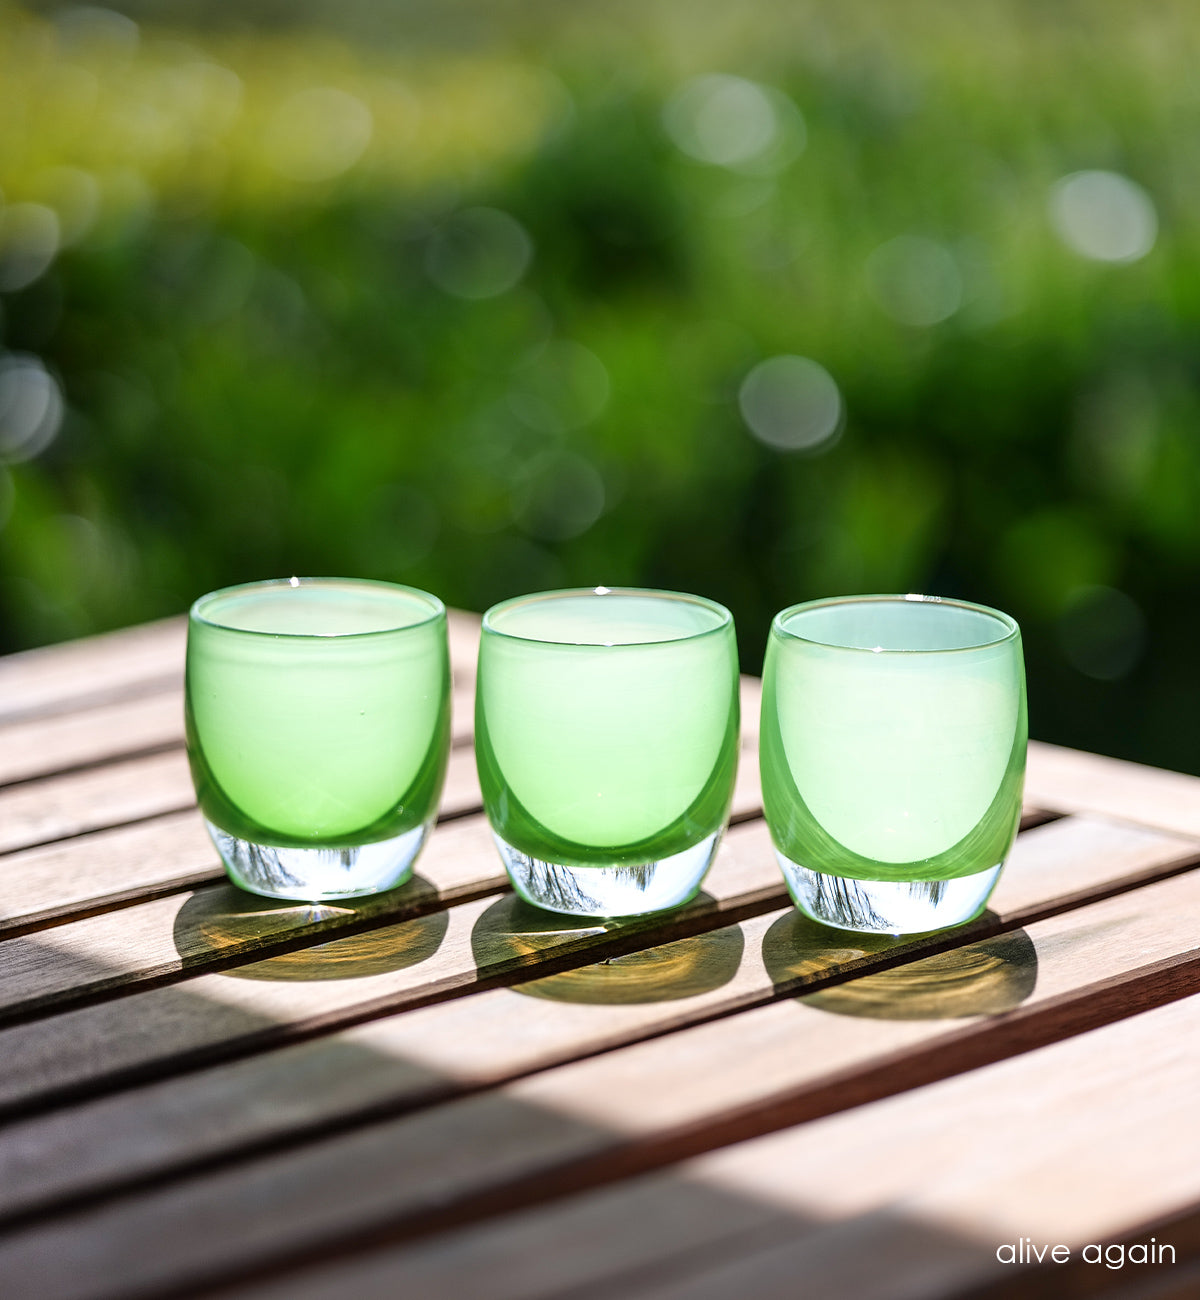 alive again vibrant green, hand-blown glass votive candle holder